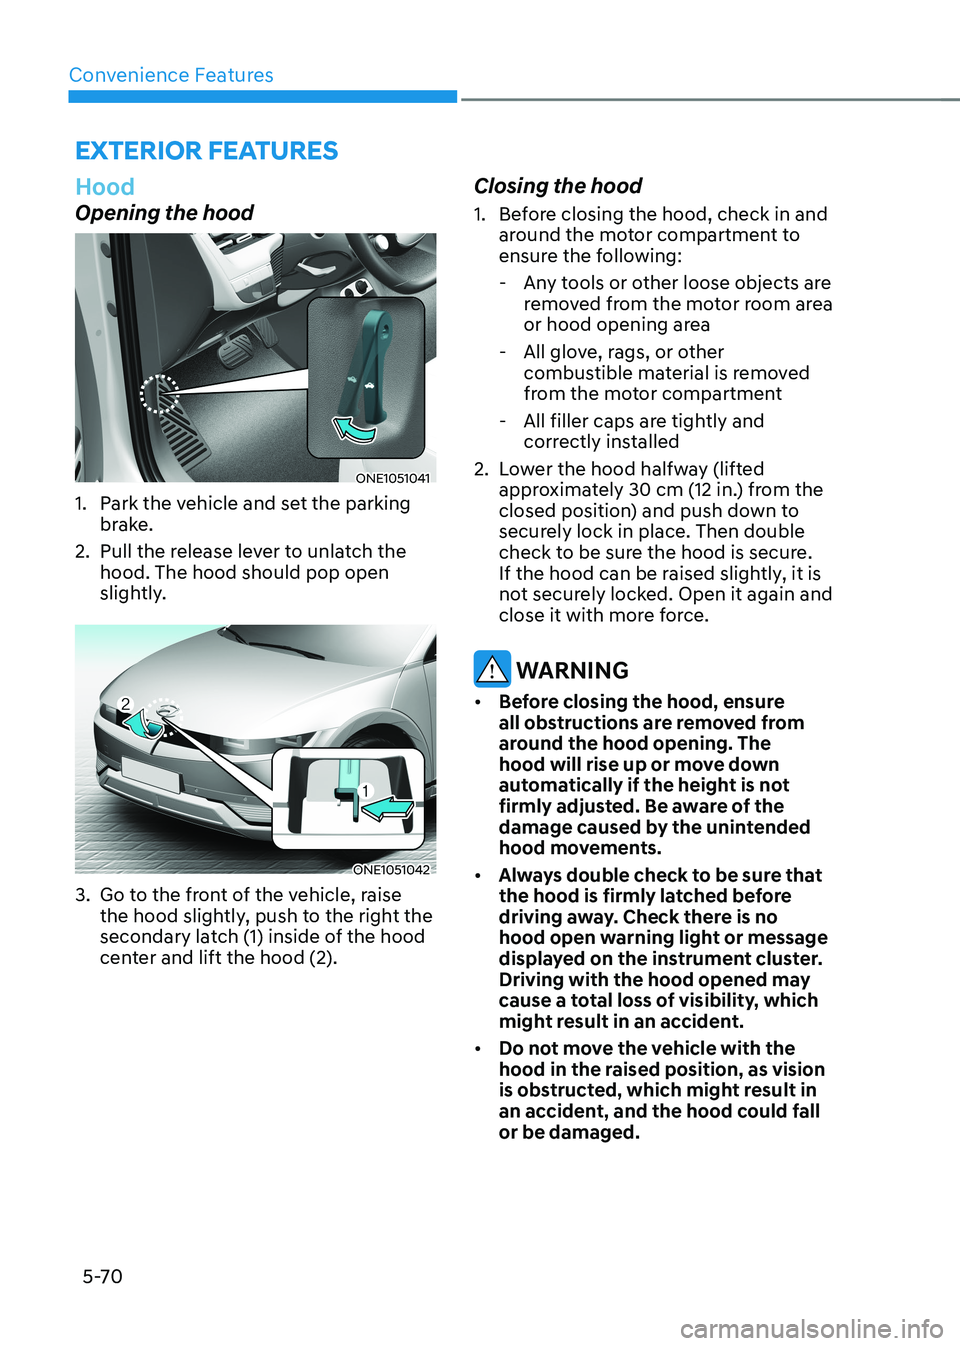 HYUNDAI IONIQ 5 2023  Owners Manual Convenience Features
5-70
exterior feAtures
Hood
Opening the hood
ONE1051041 
1.  Park the vehicle and set the parking  brake.
2.  Pull the release lever to unlatch the  hood. The hood should pop open